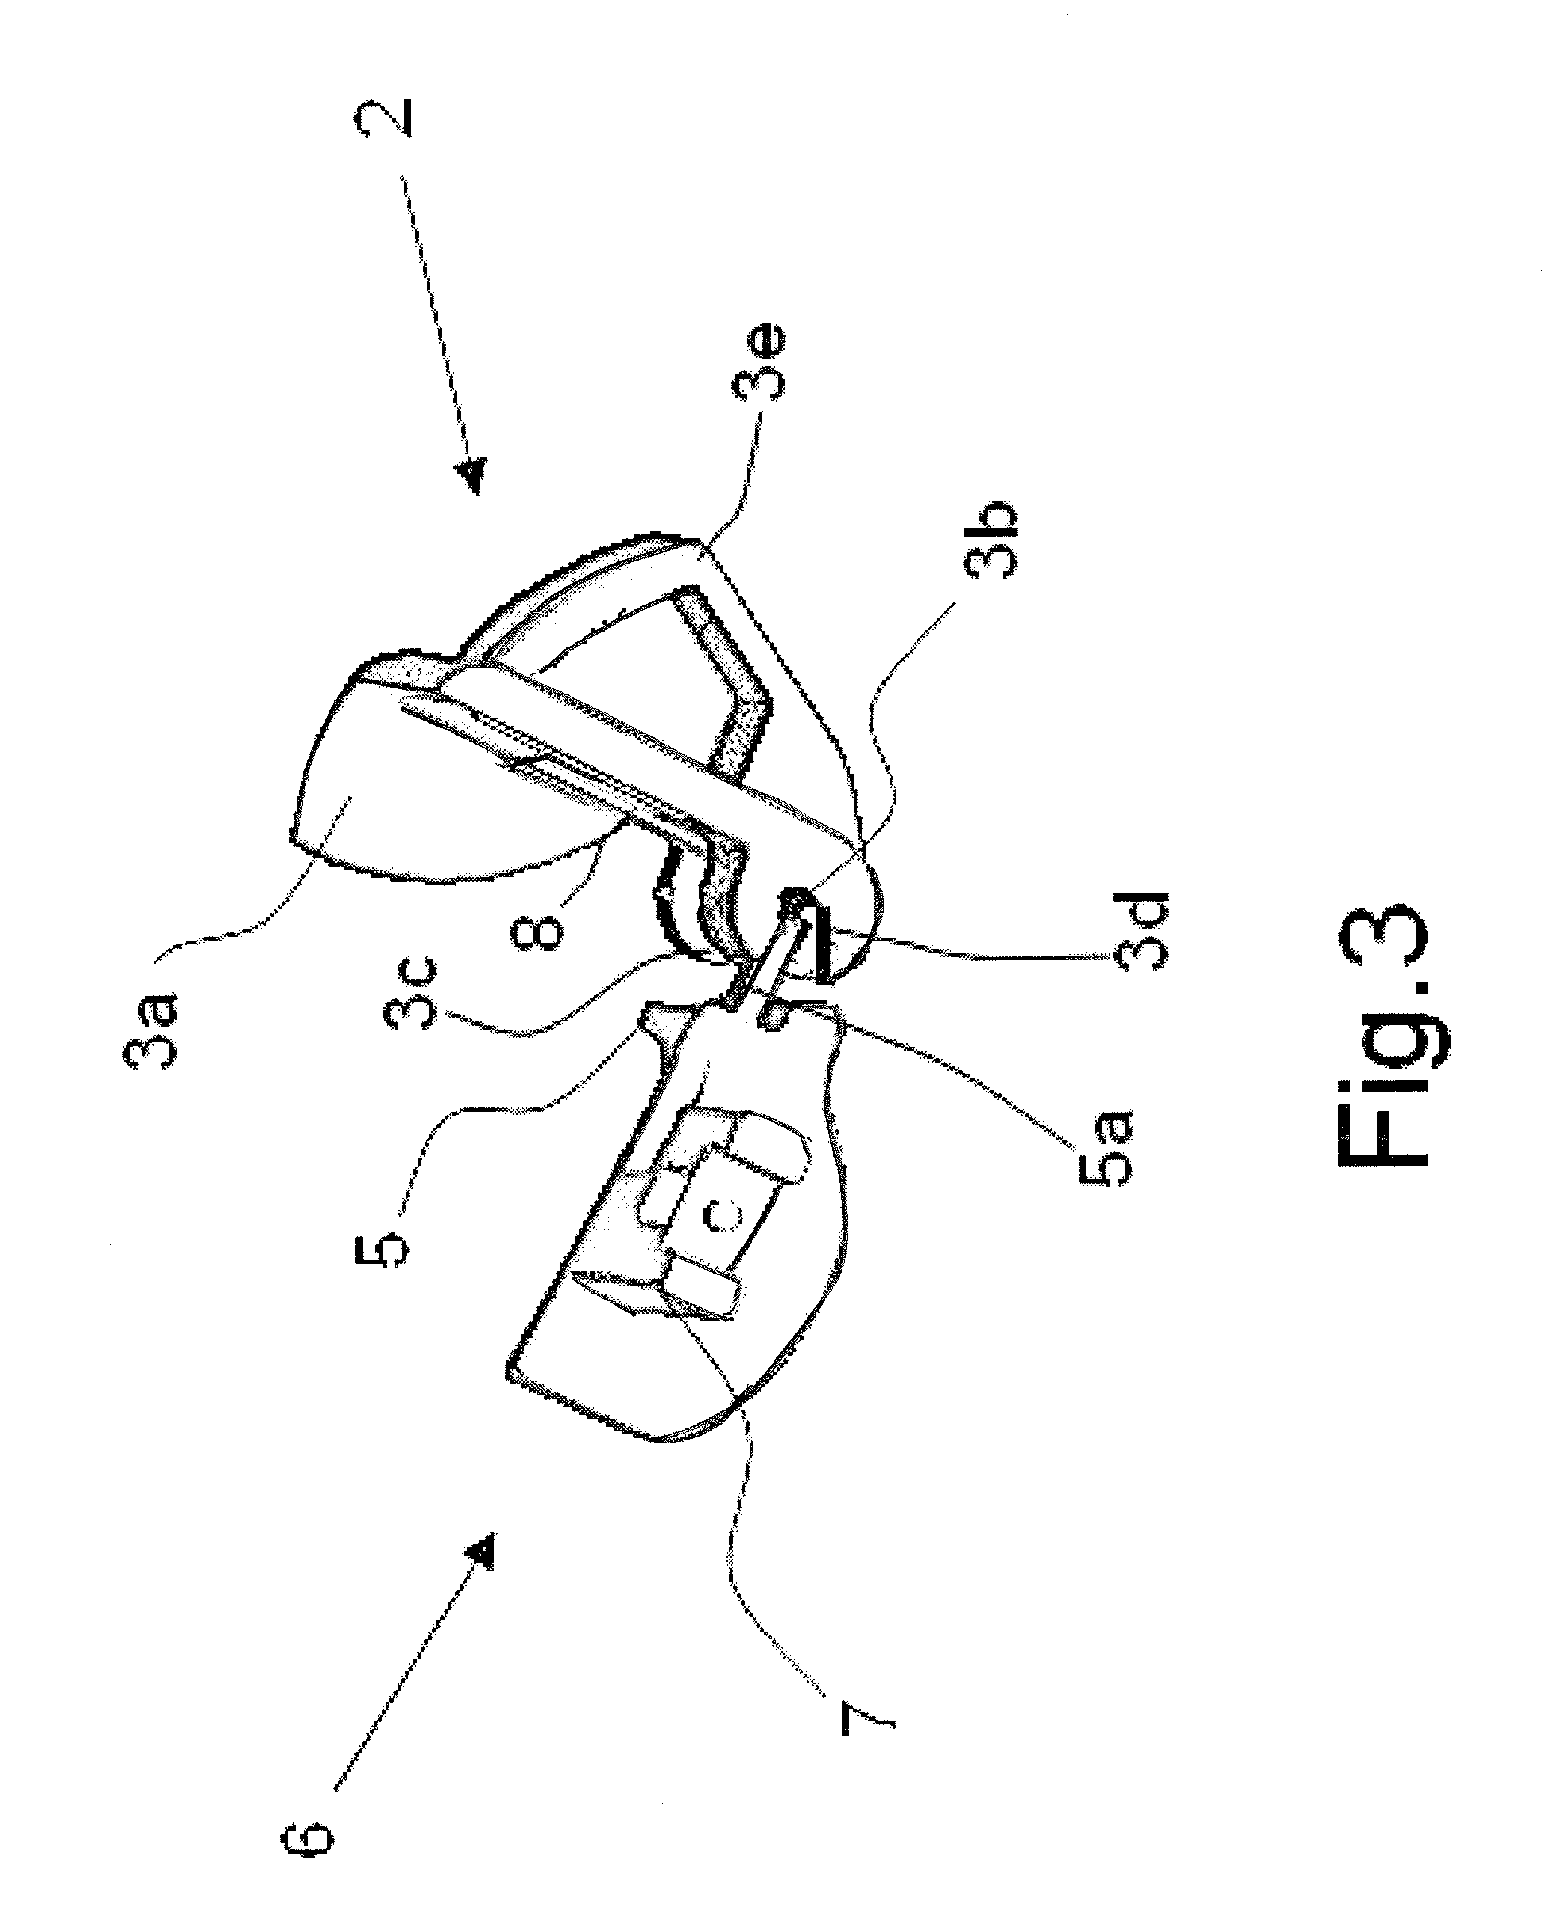 Handgun holster provided with a shutter safety lock